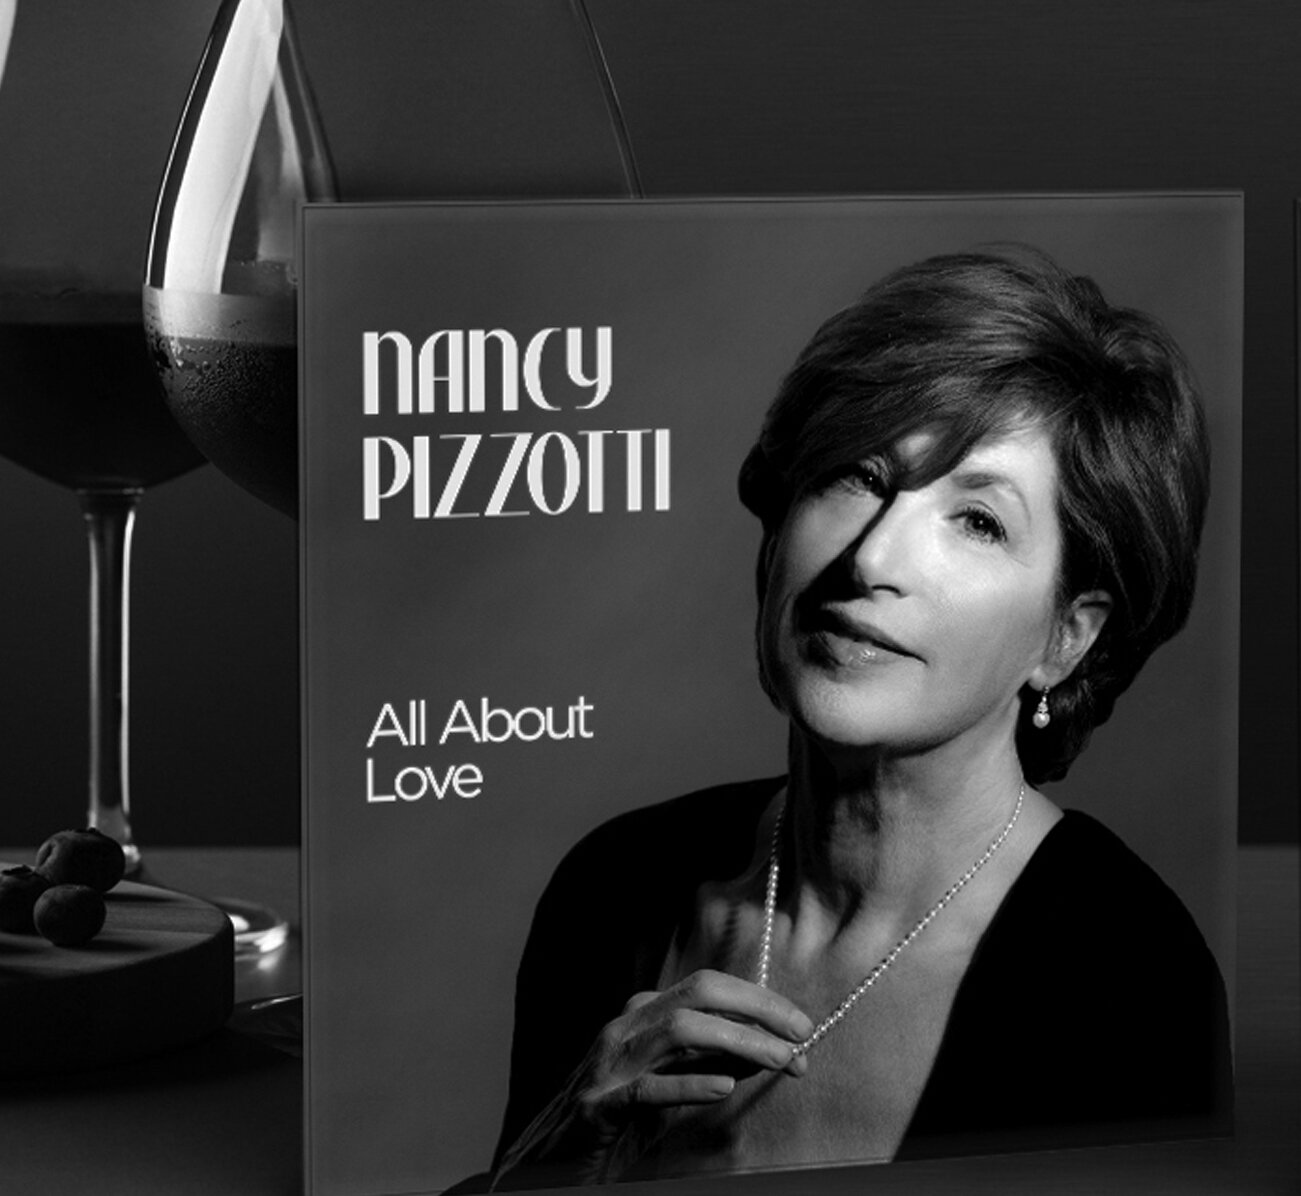 Nancy Pizzotti - All About Love